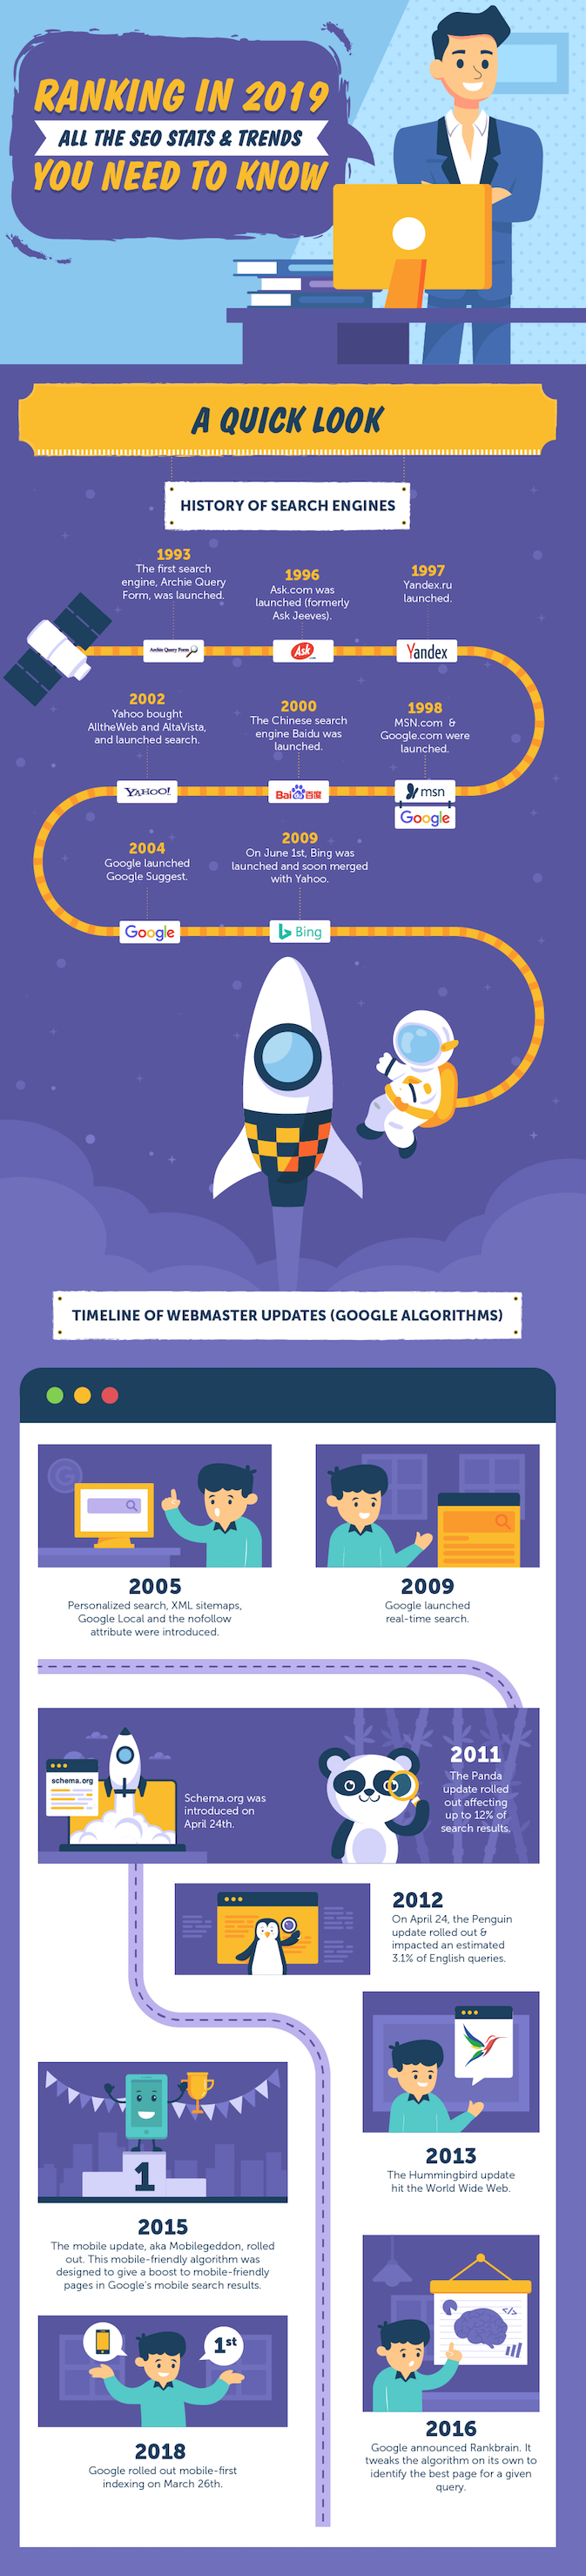 Explore 2019's latest SEO statistics by SEO Tribunal. From algorithm updates to current and future trends; learn all there is to know about SEO this year!